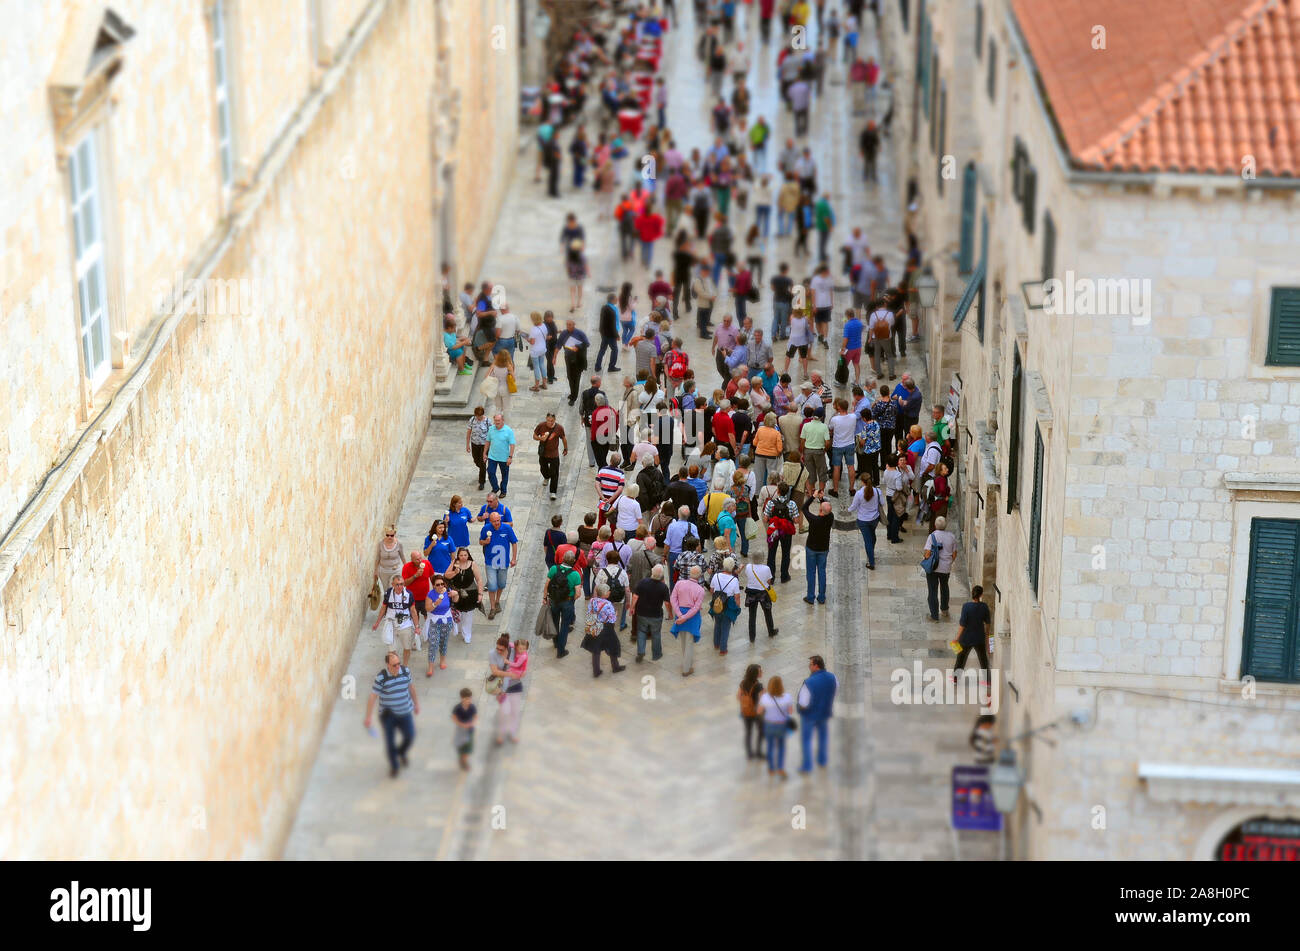 Dubrovnik / Croatia - 10-06-2015 - Interior view of Main Street with Crowd (People) in Old Town (Imperial Fortress) with Miniature (Tilt Shift) Effect Stock Photo